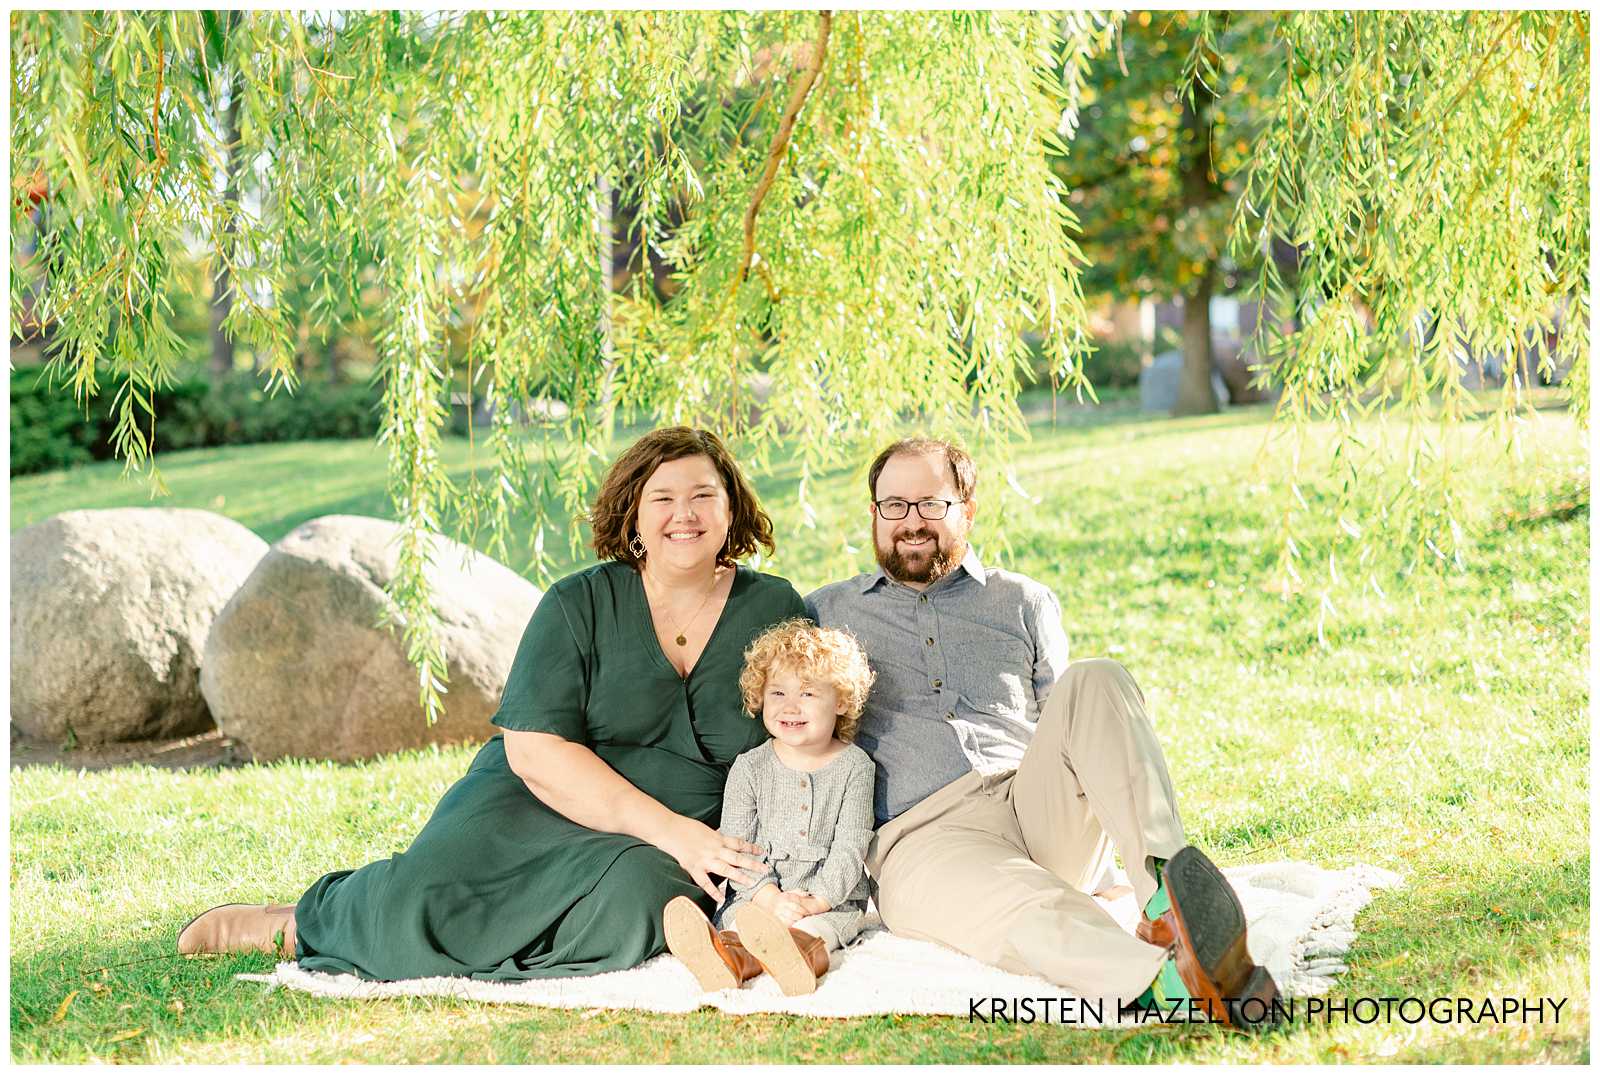 Mom, Dad, and young daughter on a white blanket under a willow tree